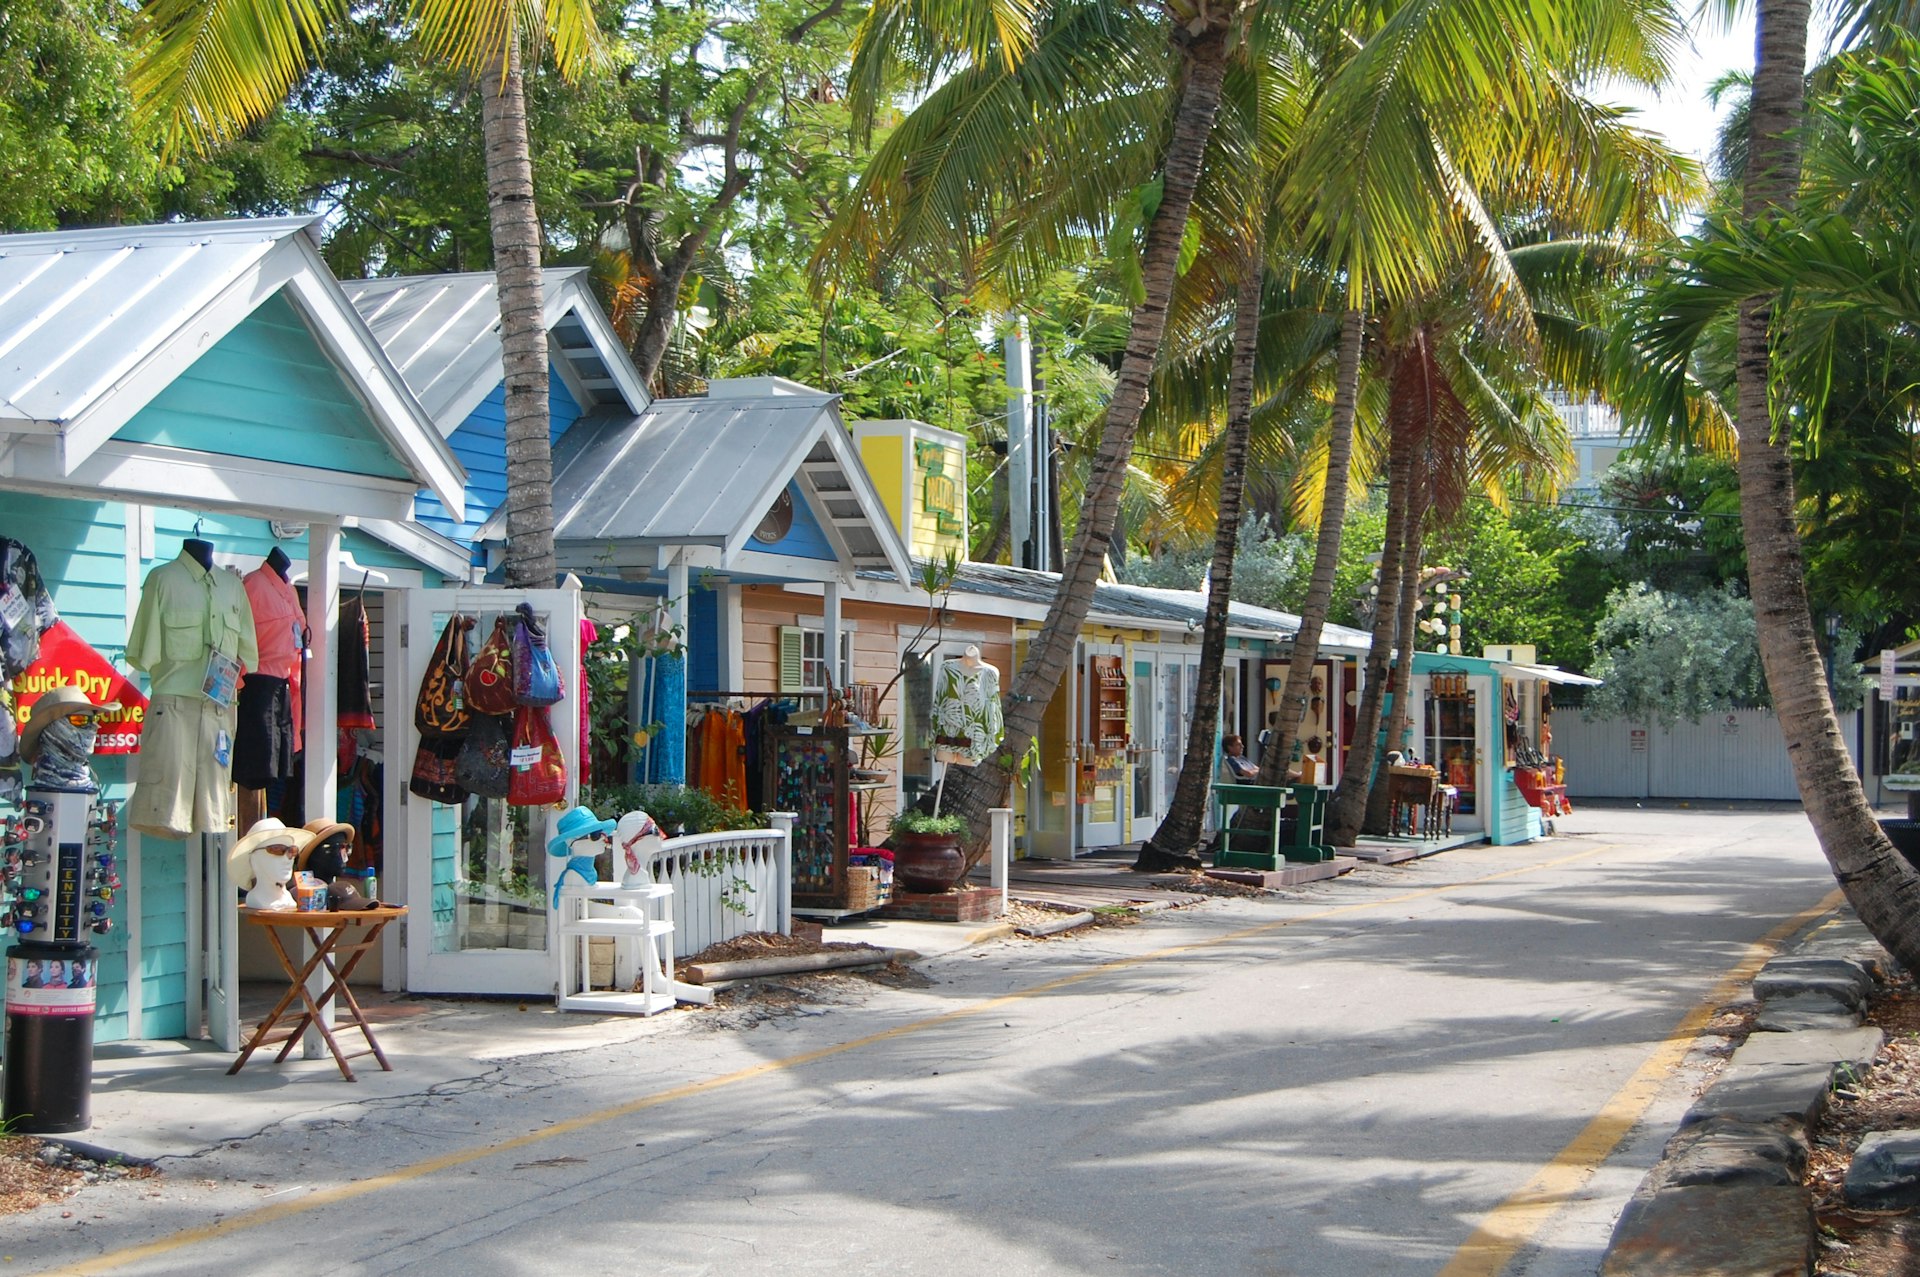 A row of small shops selling souvenirs and beach equipment